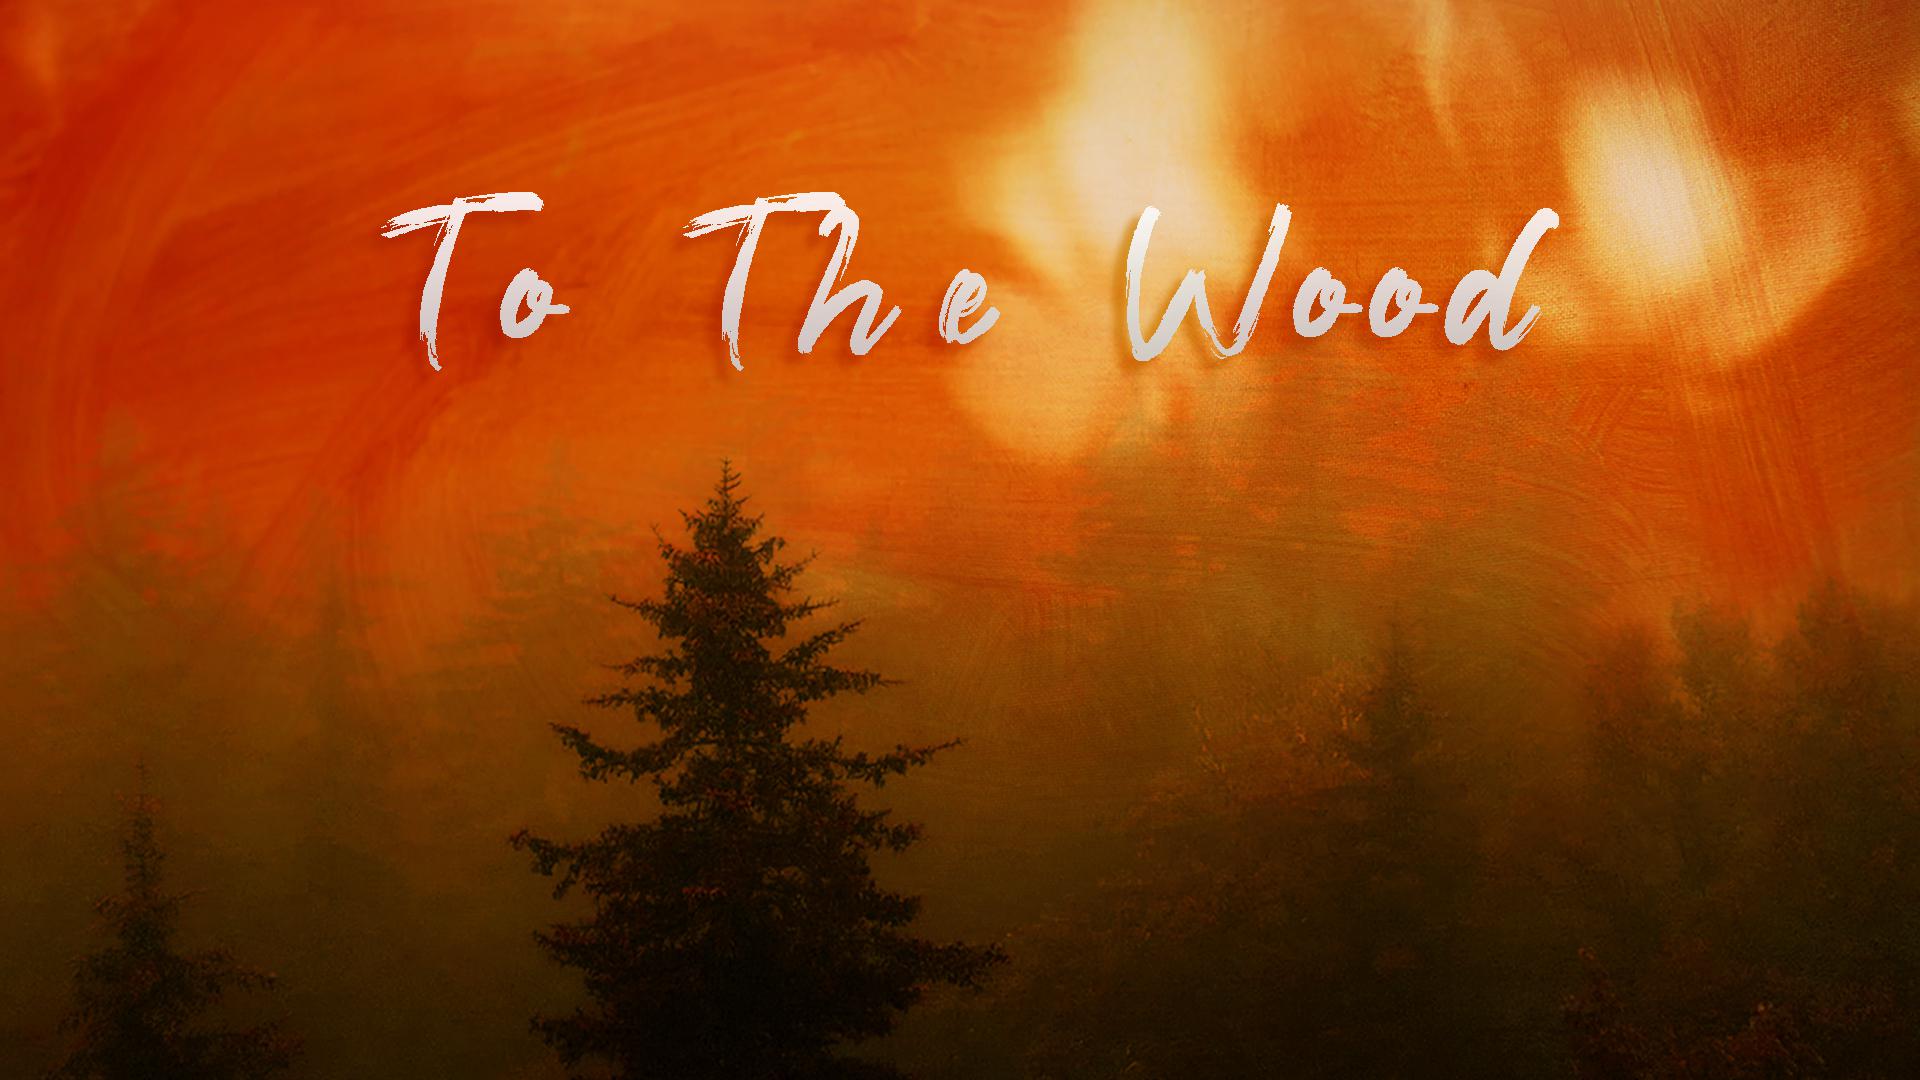 TO THE WOOD